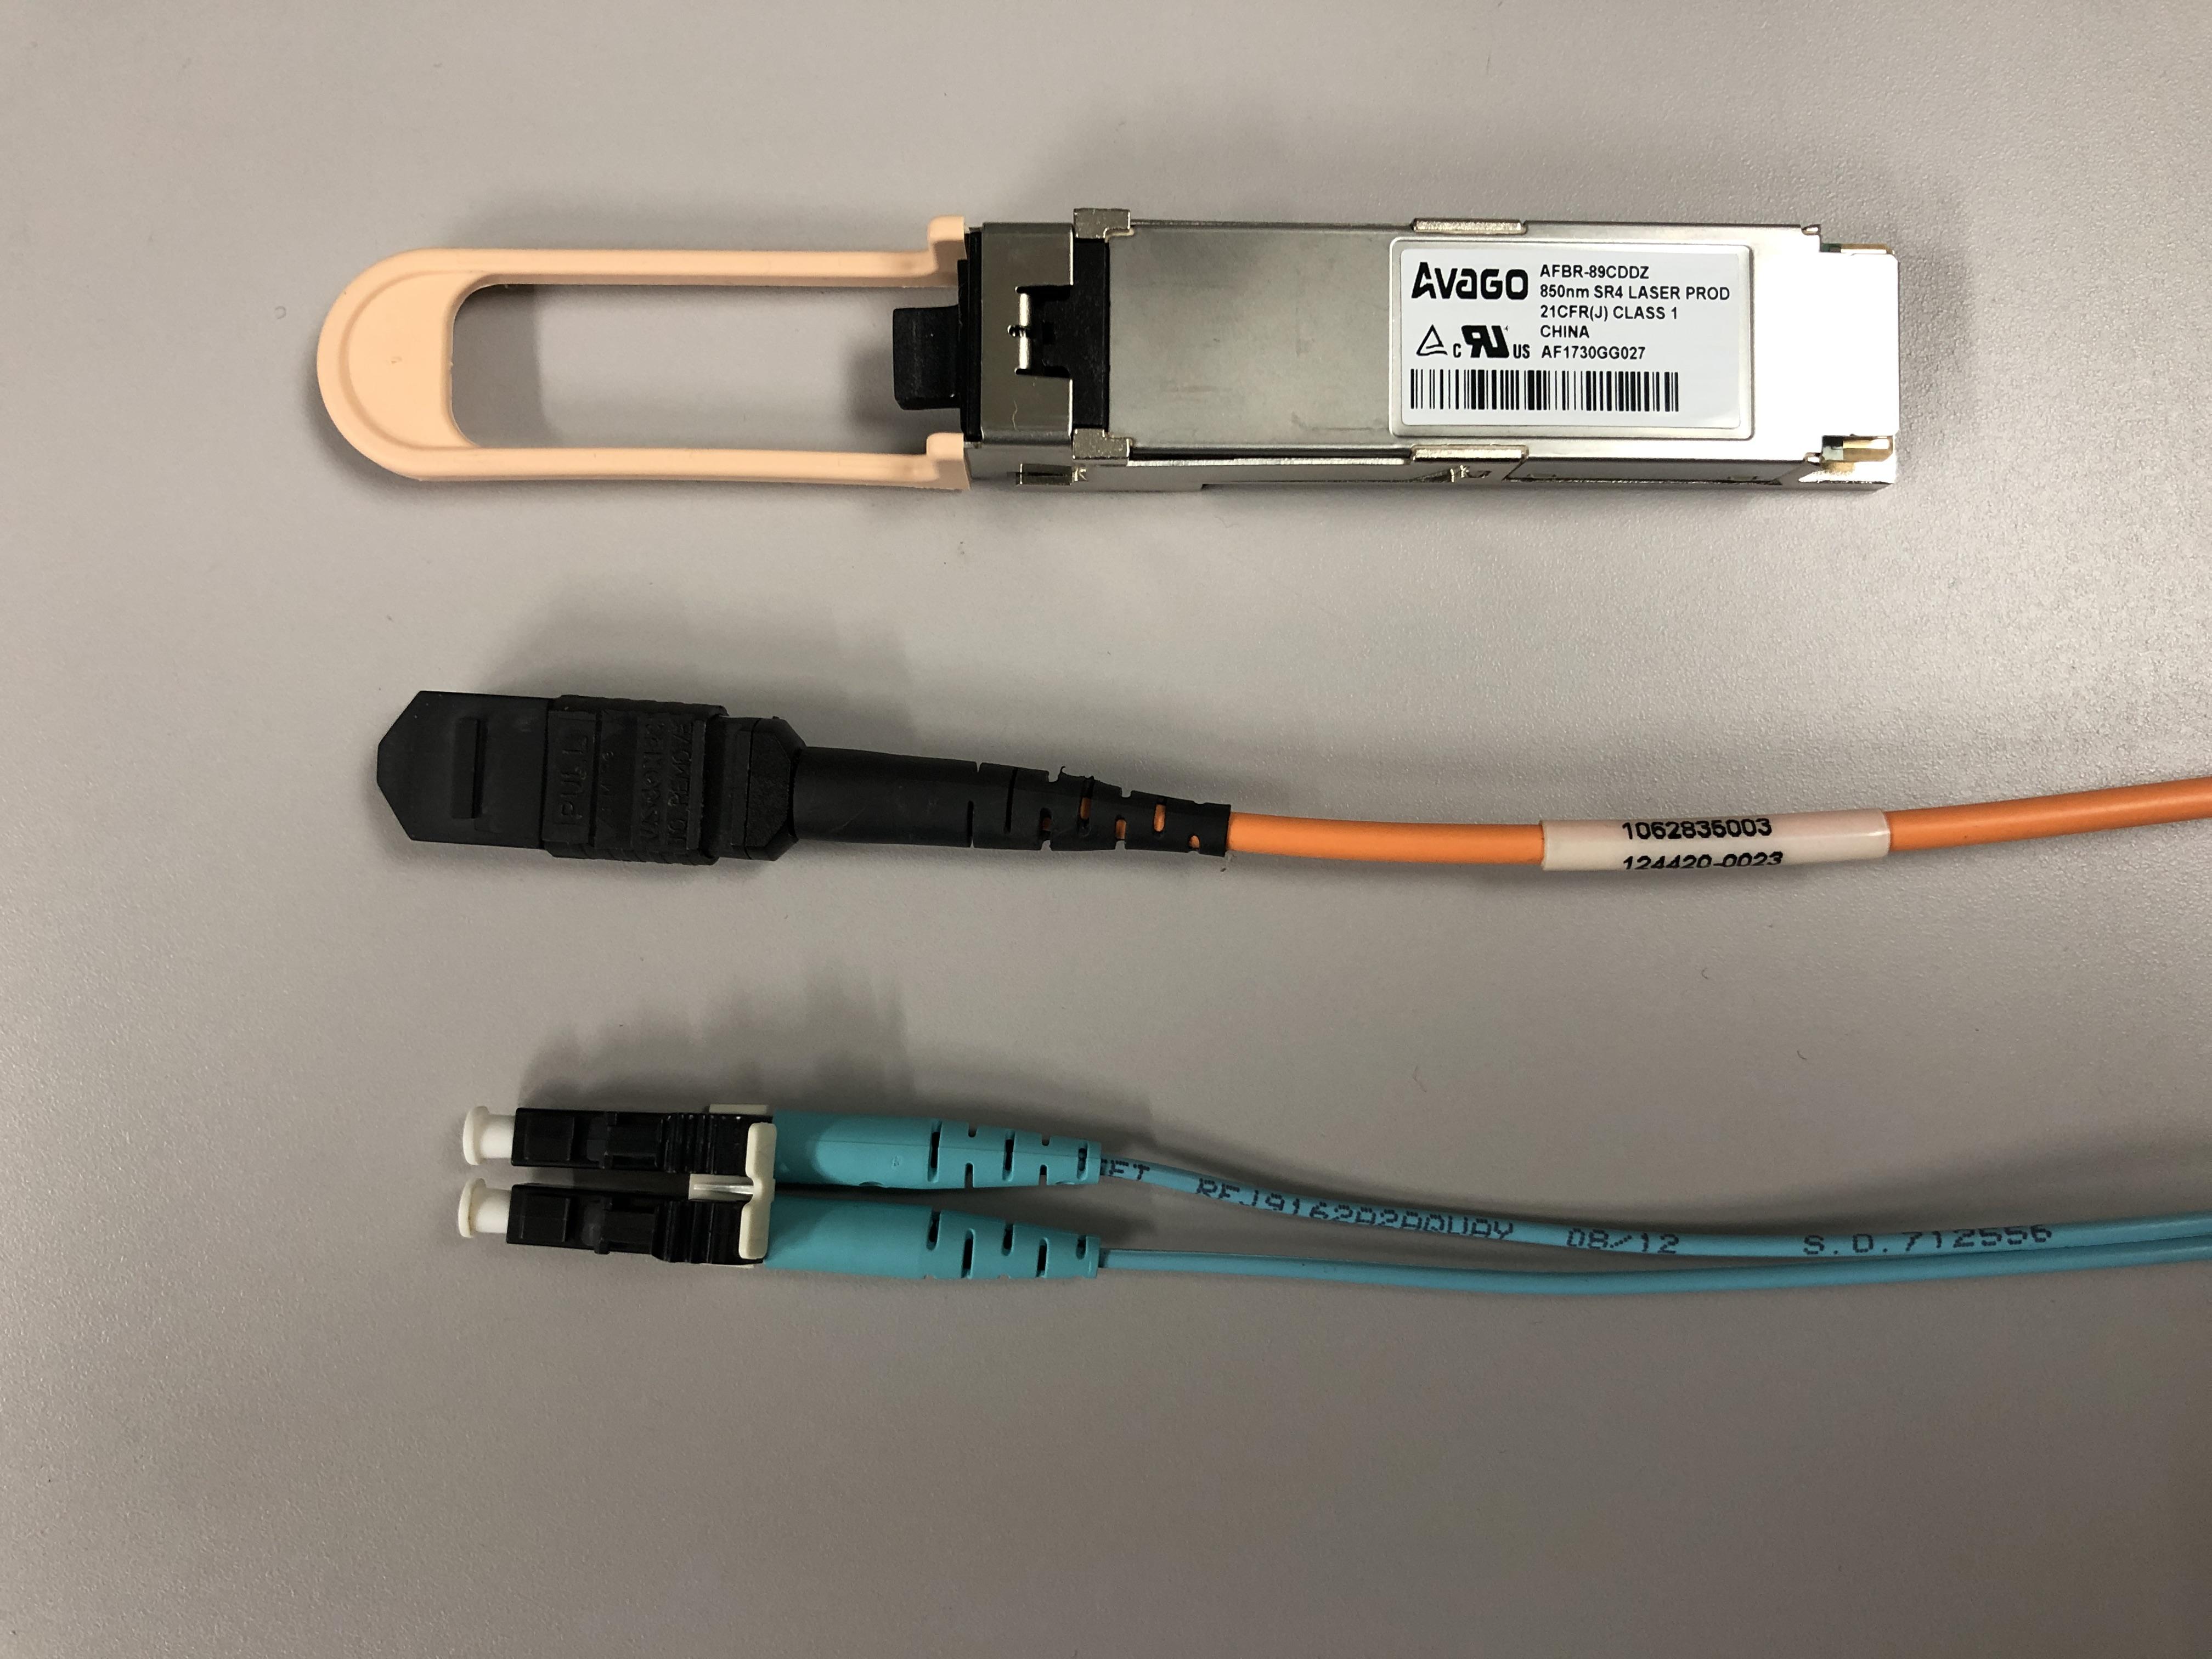 12-fiber with MPO connector and 1-fiber with LC connector